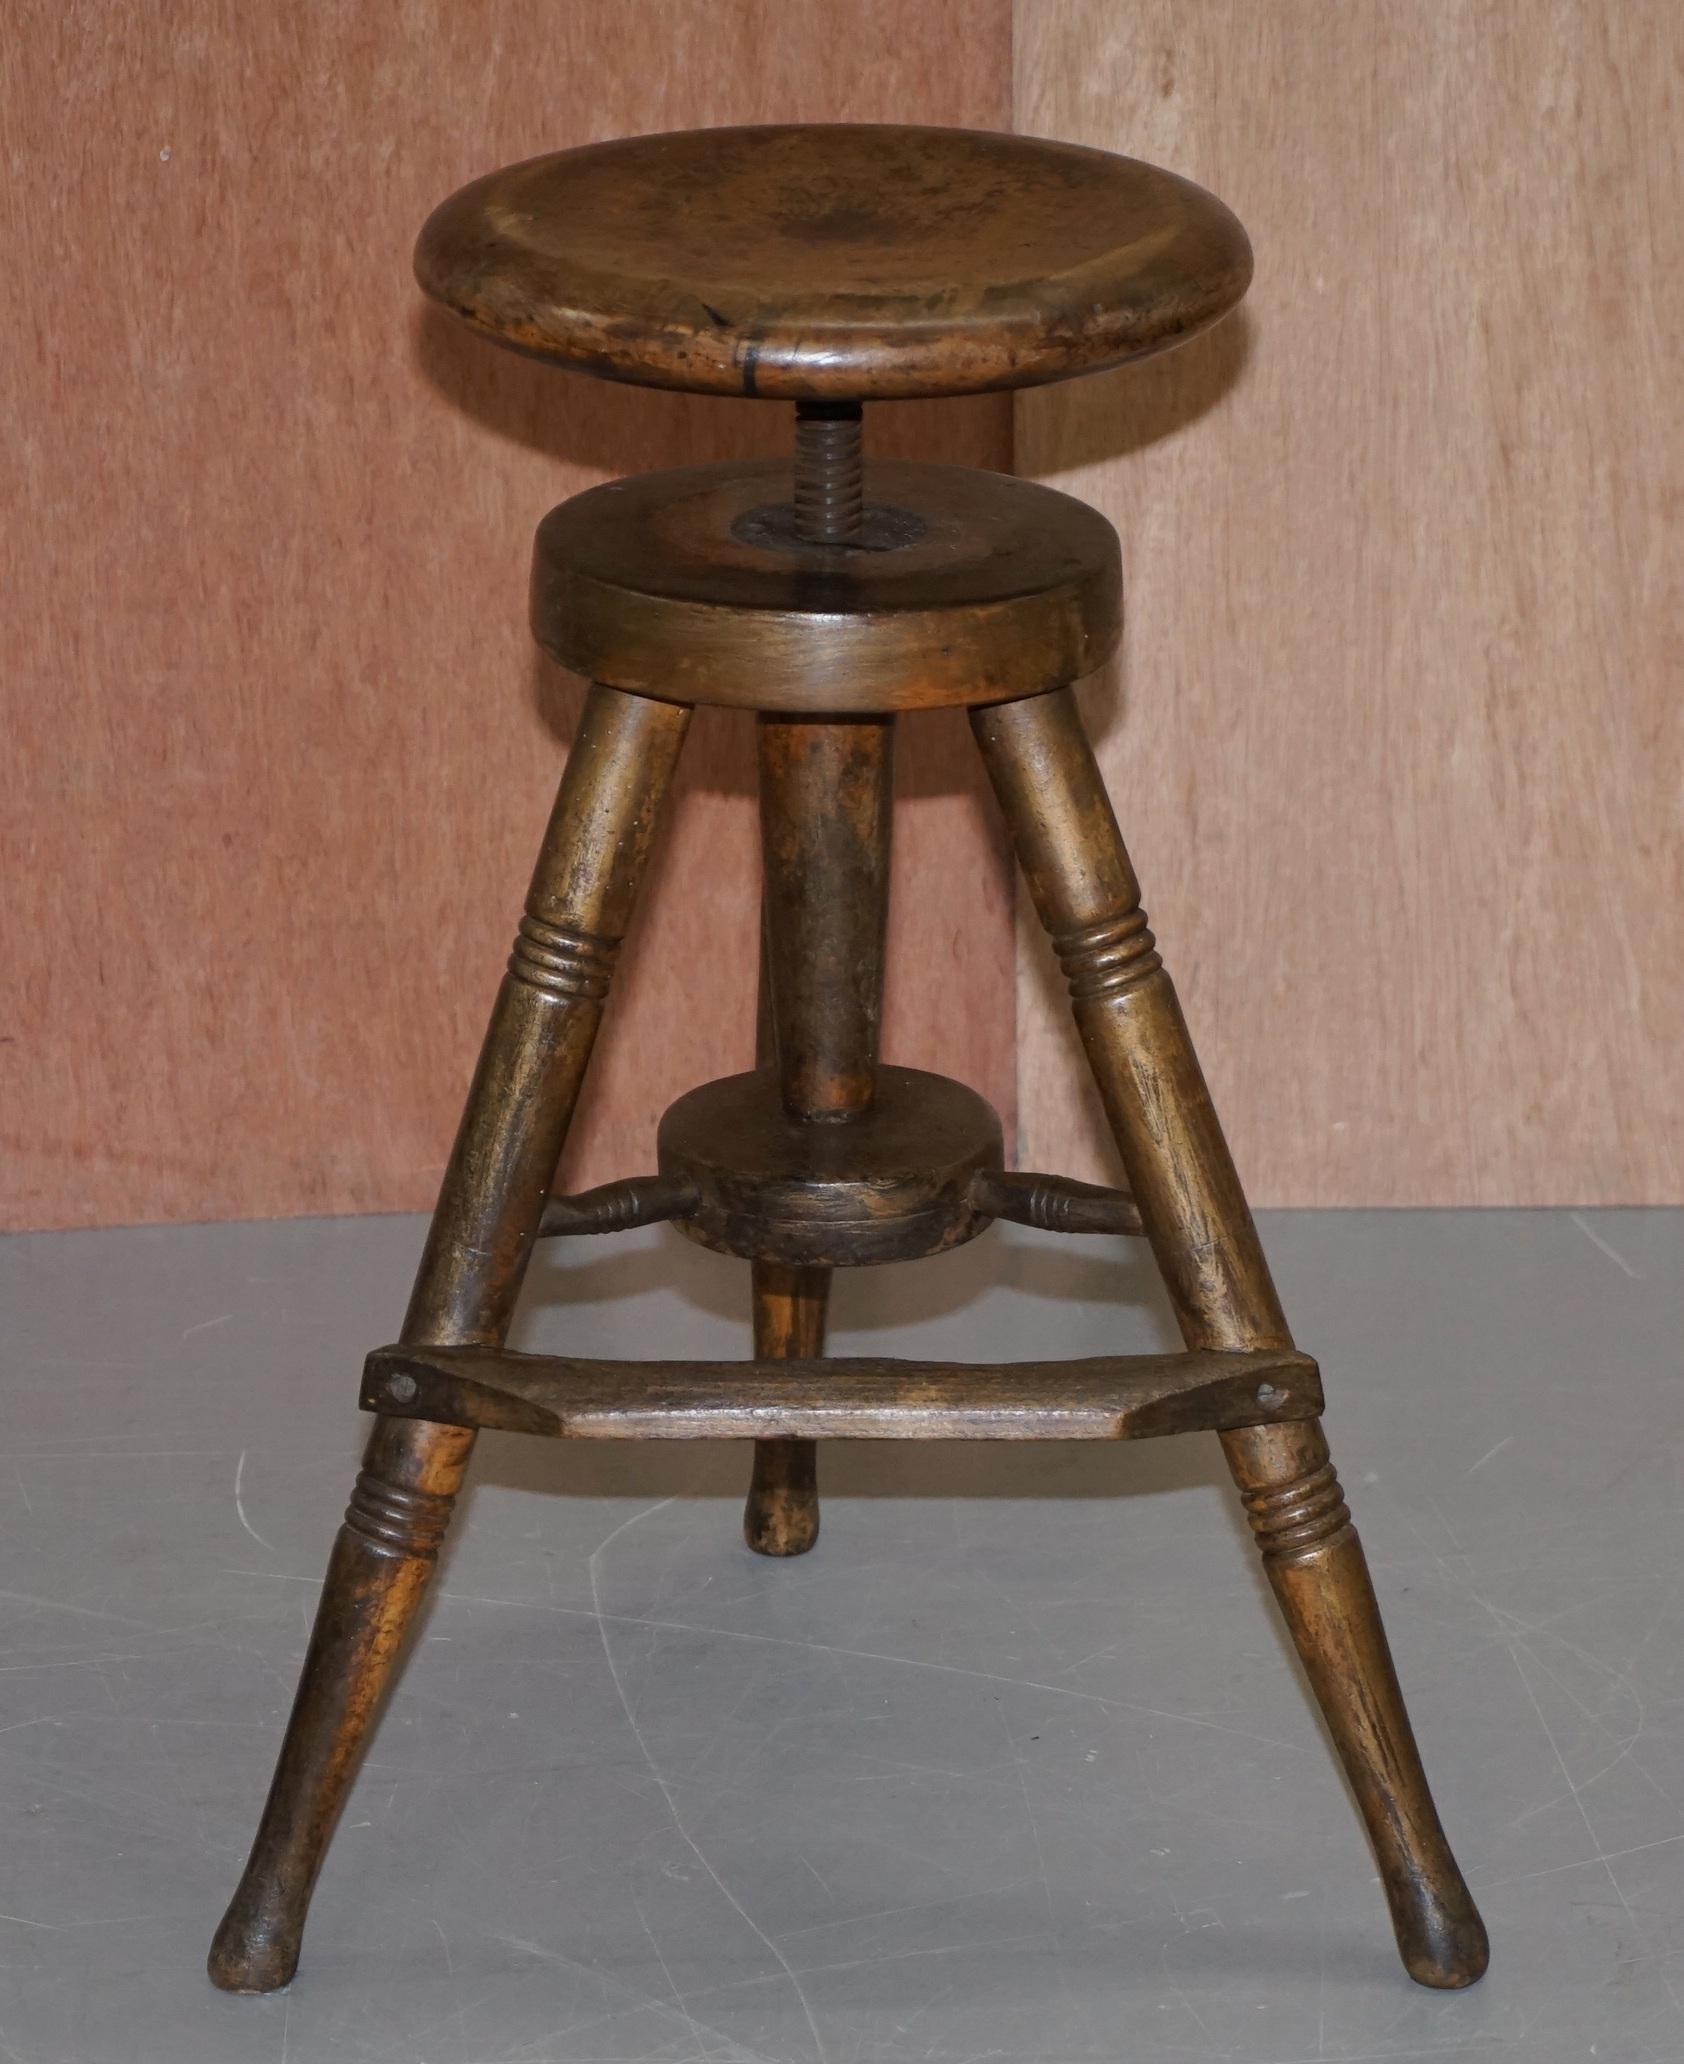 We are delighted to offer for sale this absolutely sublime 19th century Belgium Walnut height adjustable Architects stool

A very well made original piece, it survived this long due to the very solid and well made frame, pieces like this are the